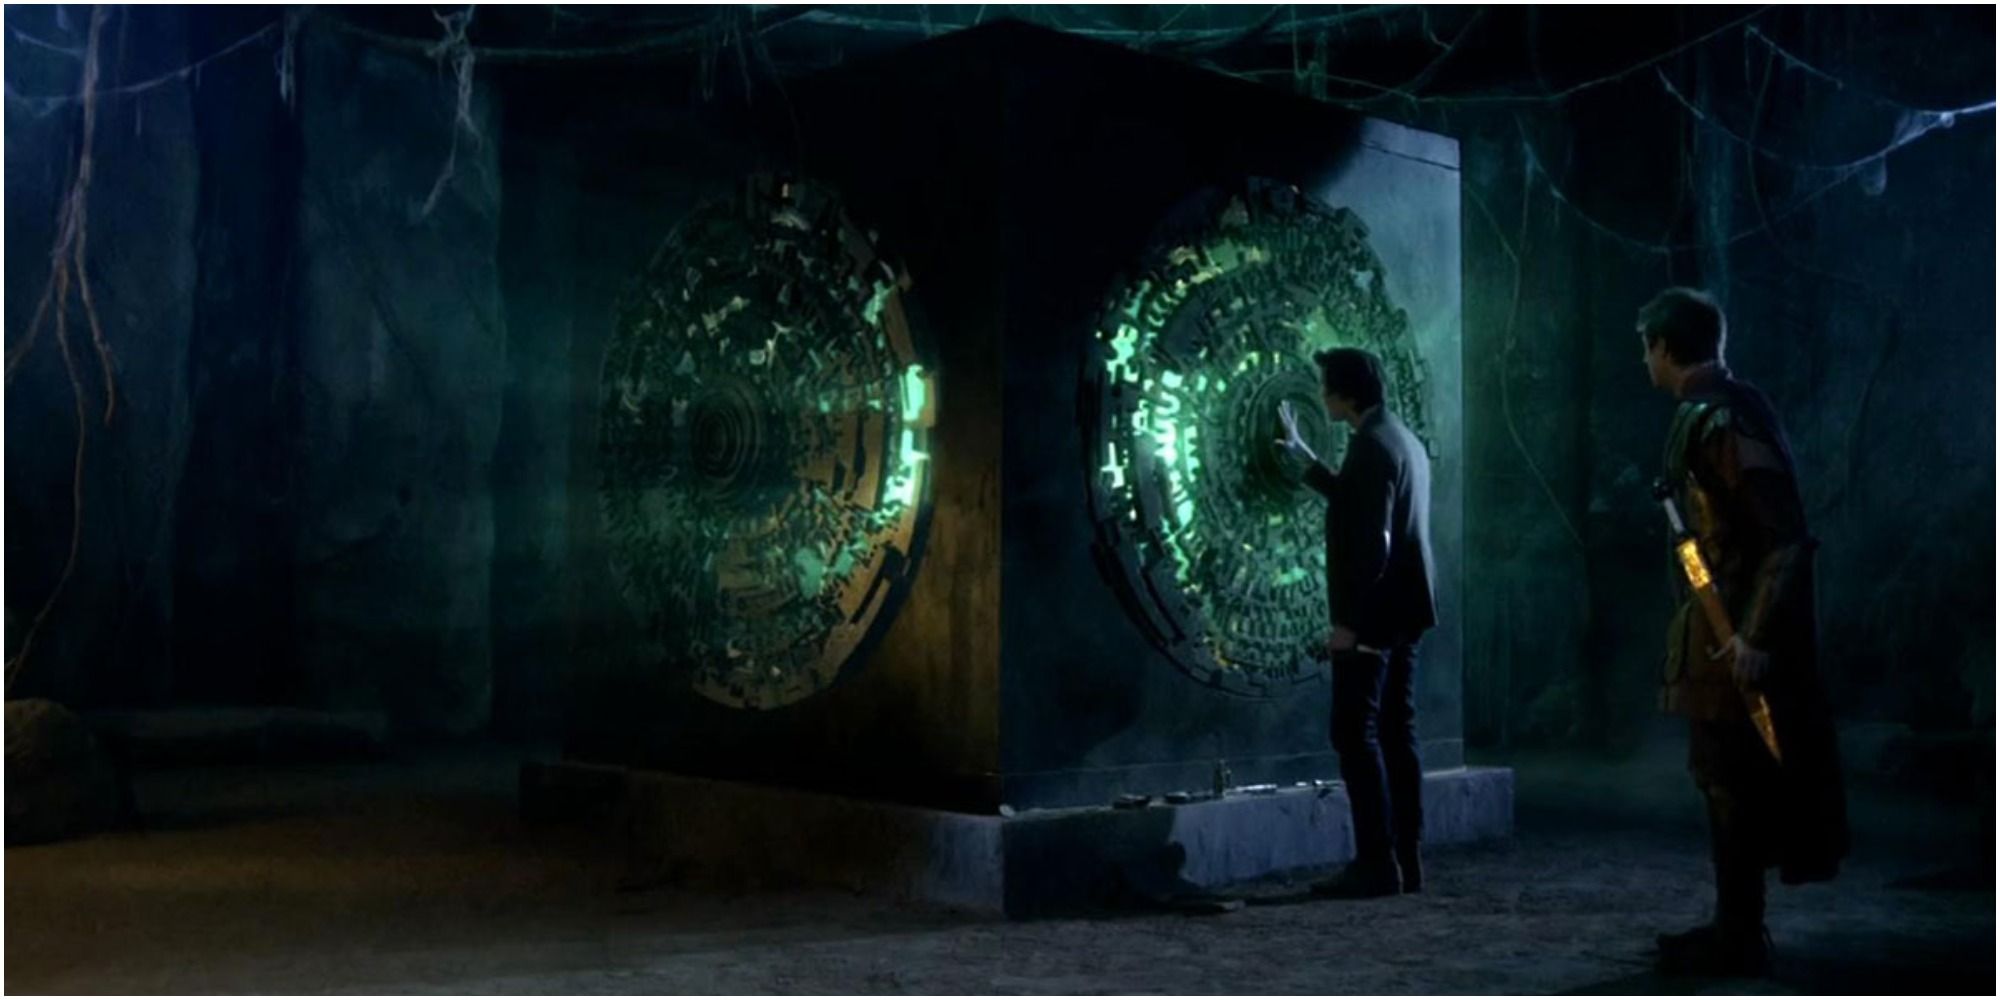 The Eleventh Doctor and Rory Pond stand by the Pandorica which glows green in Doctor Who.